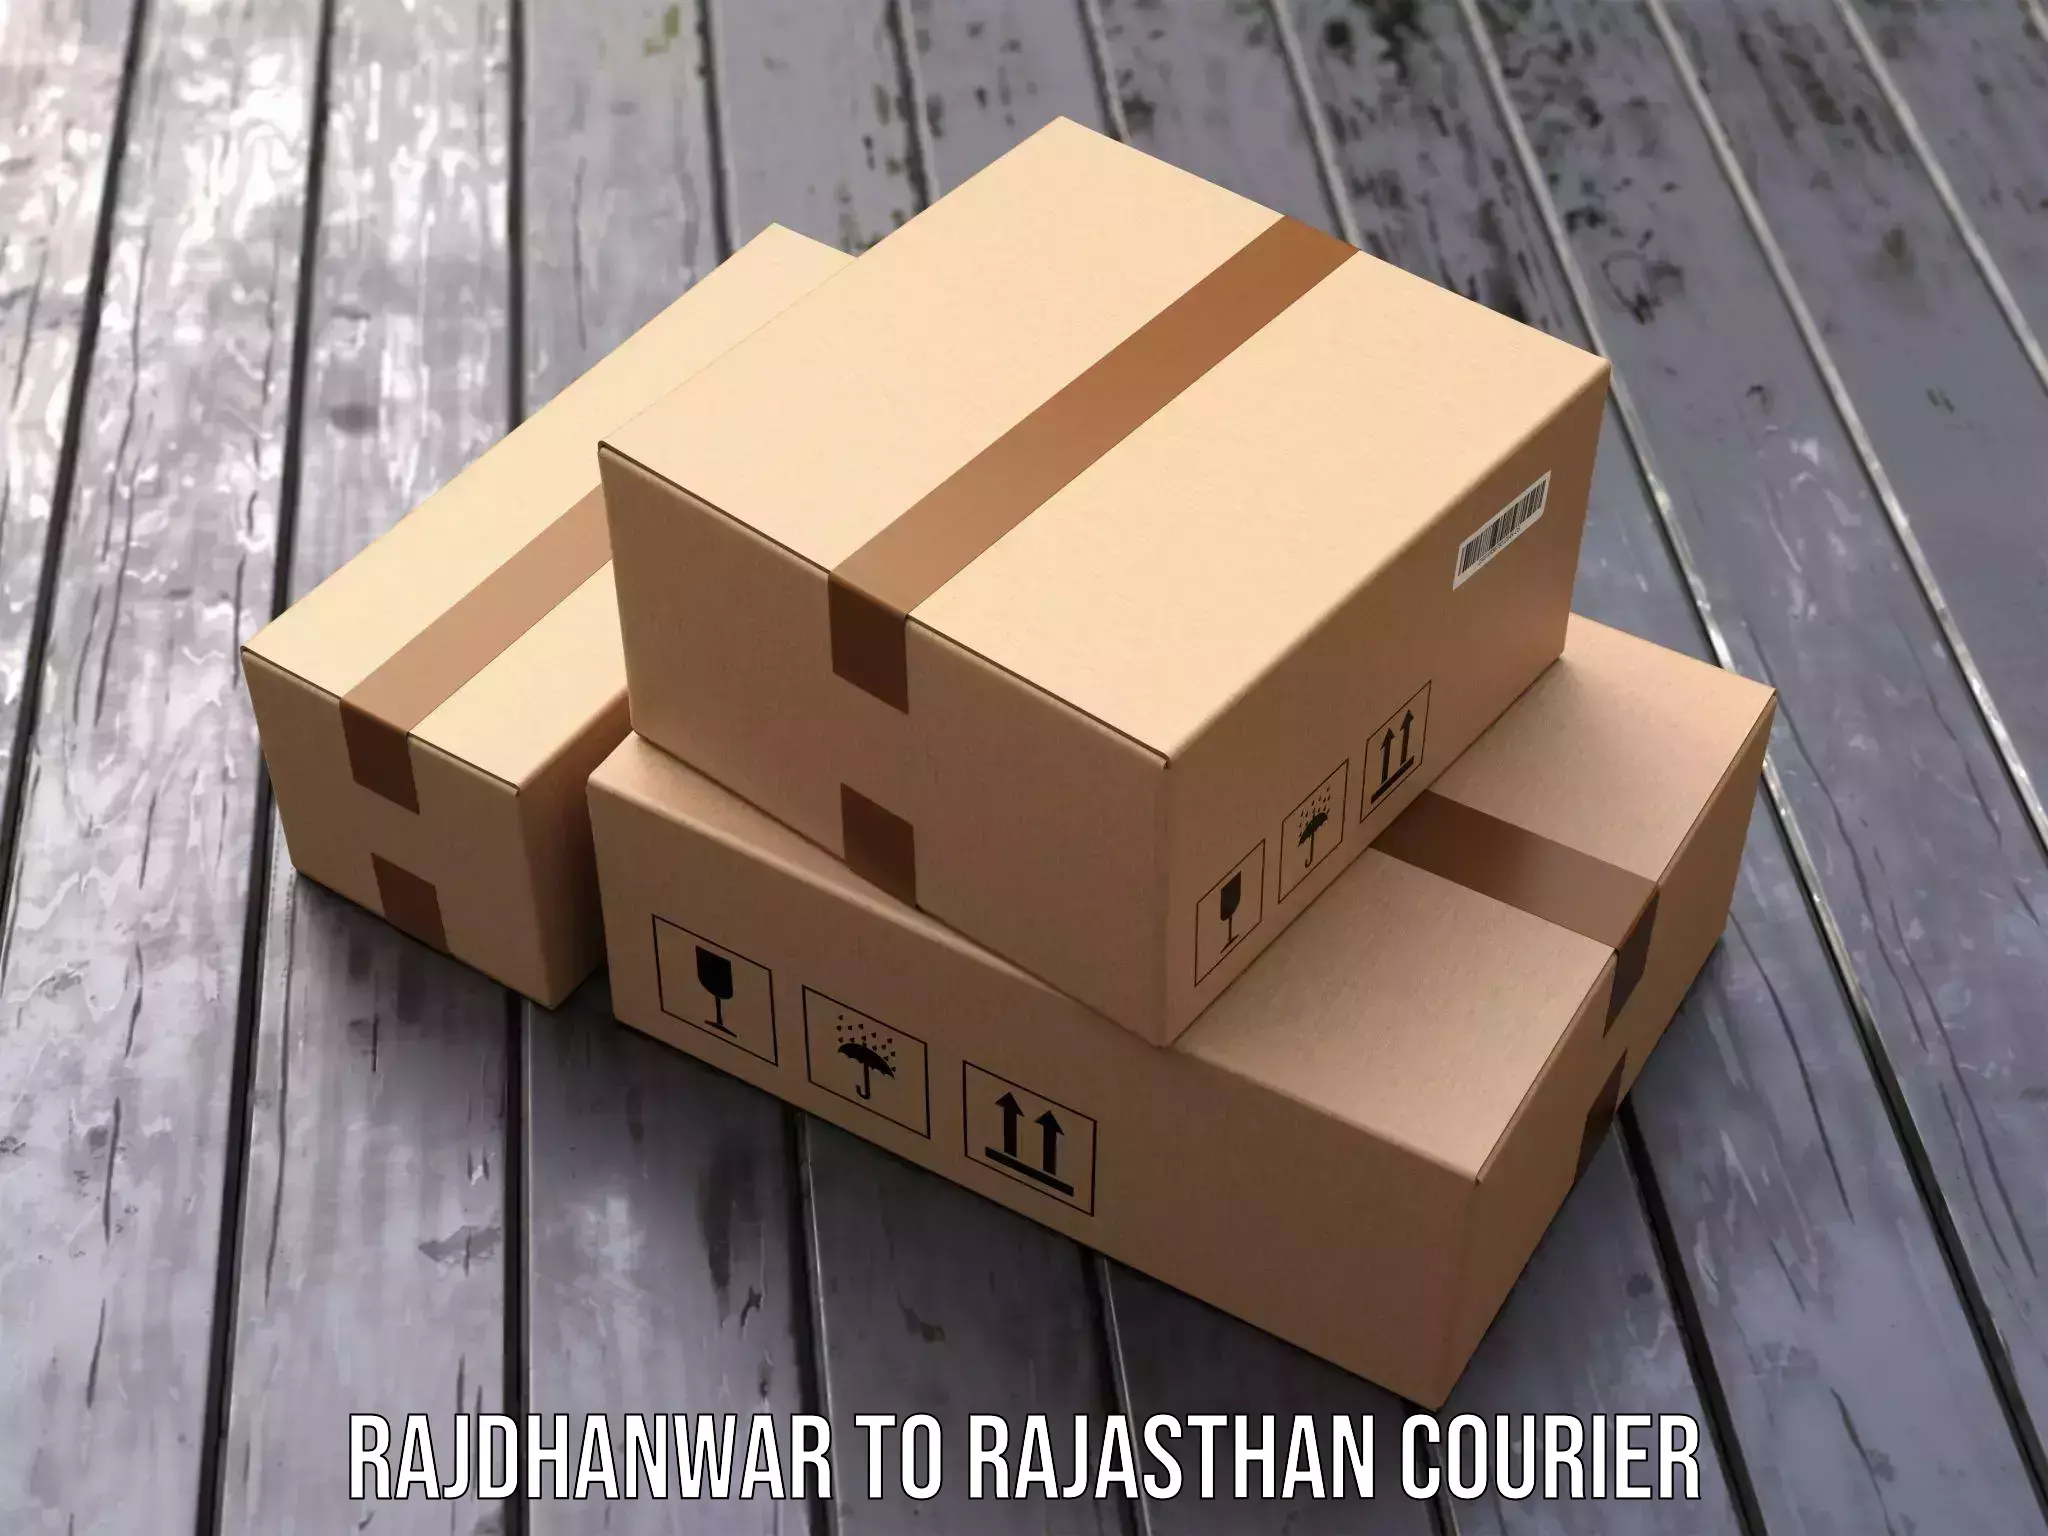 Courier service partnerships in Rajdhanwar to Piparcity